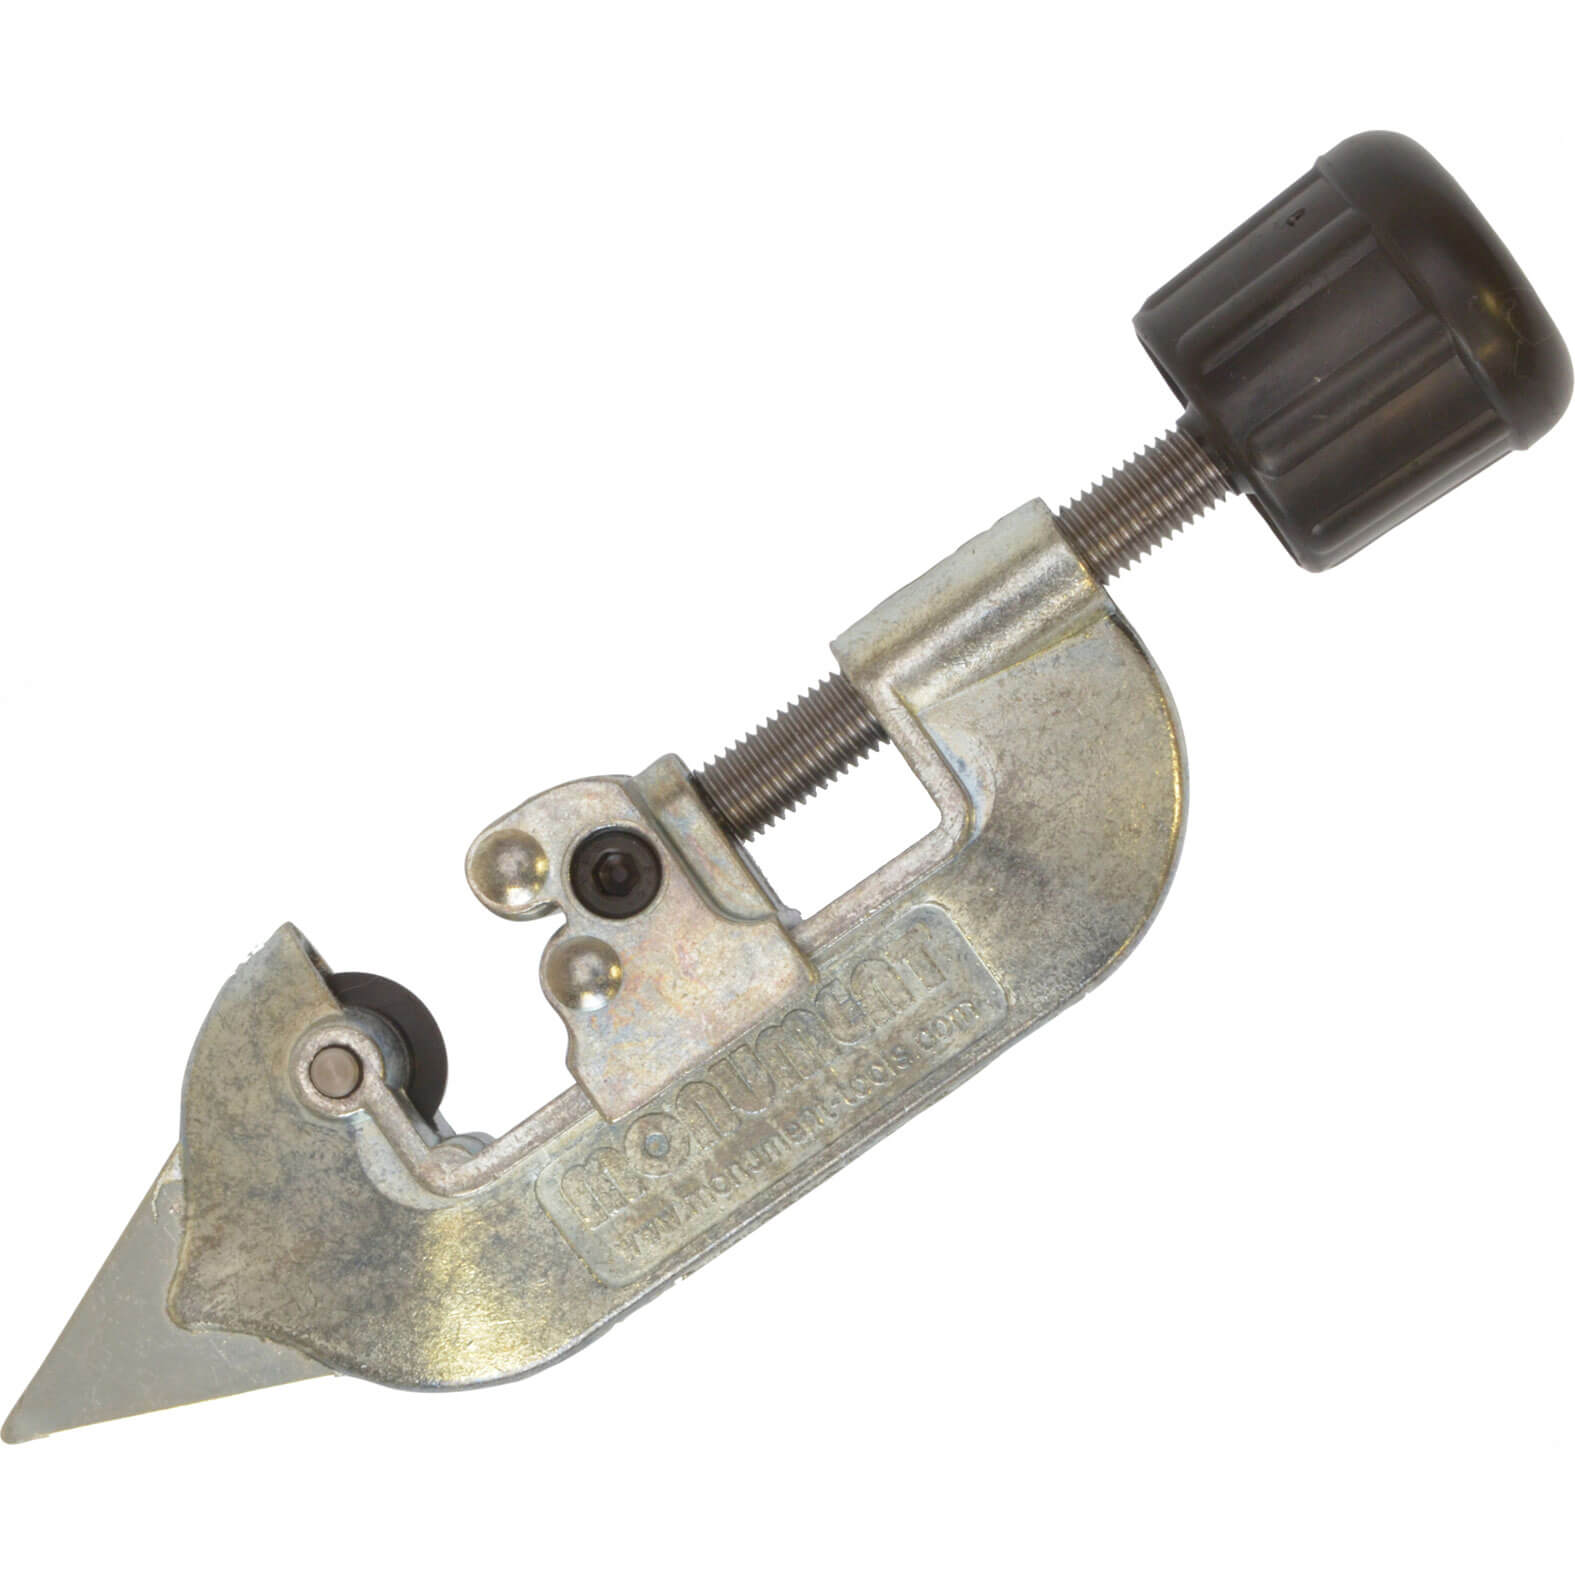 Photo of Monument Professional Adjustable Pipe Cutter 4mm - 28mm